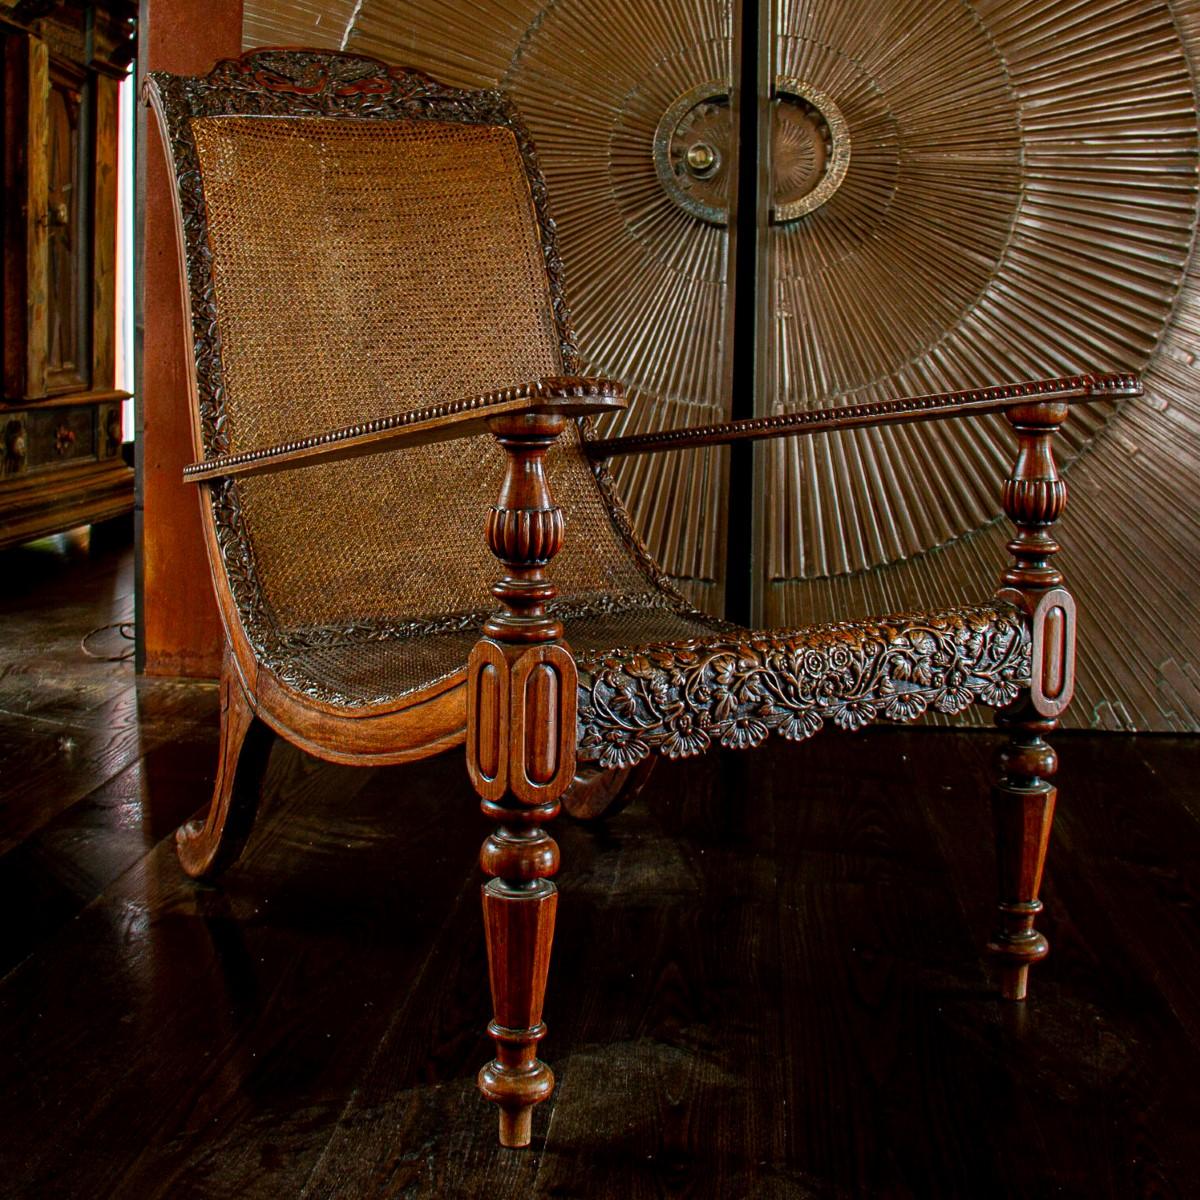 A 19th century Anglo-Indian padouk wood armchair with carved eagle crest amongst foliage. The rest of the frame is heavily carved with flowers and leaves around a rattan seat and backrest. The arms are removable from the turned padouk arm supports